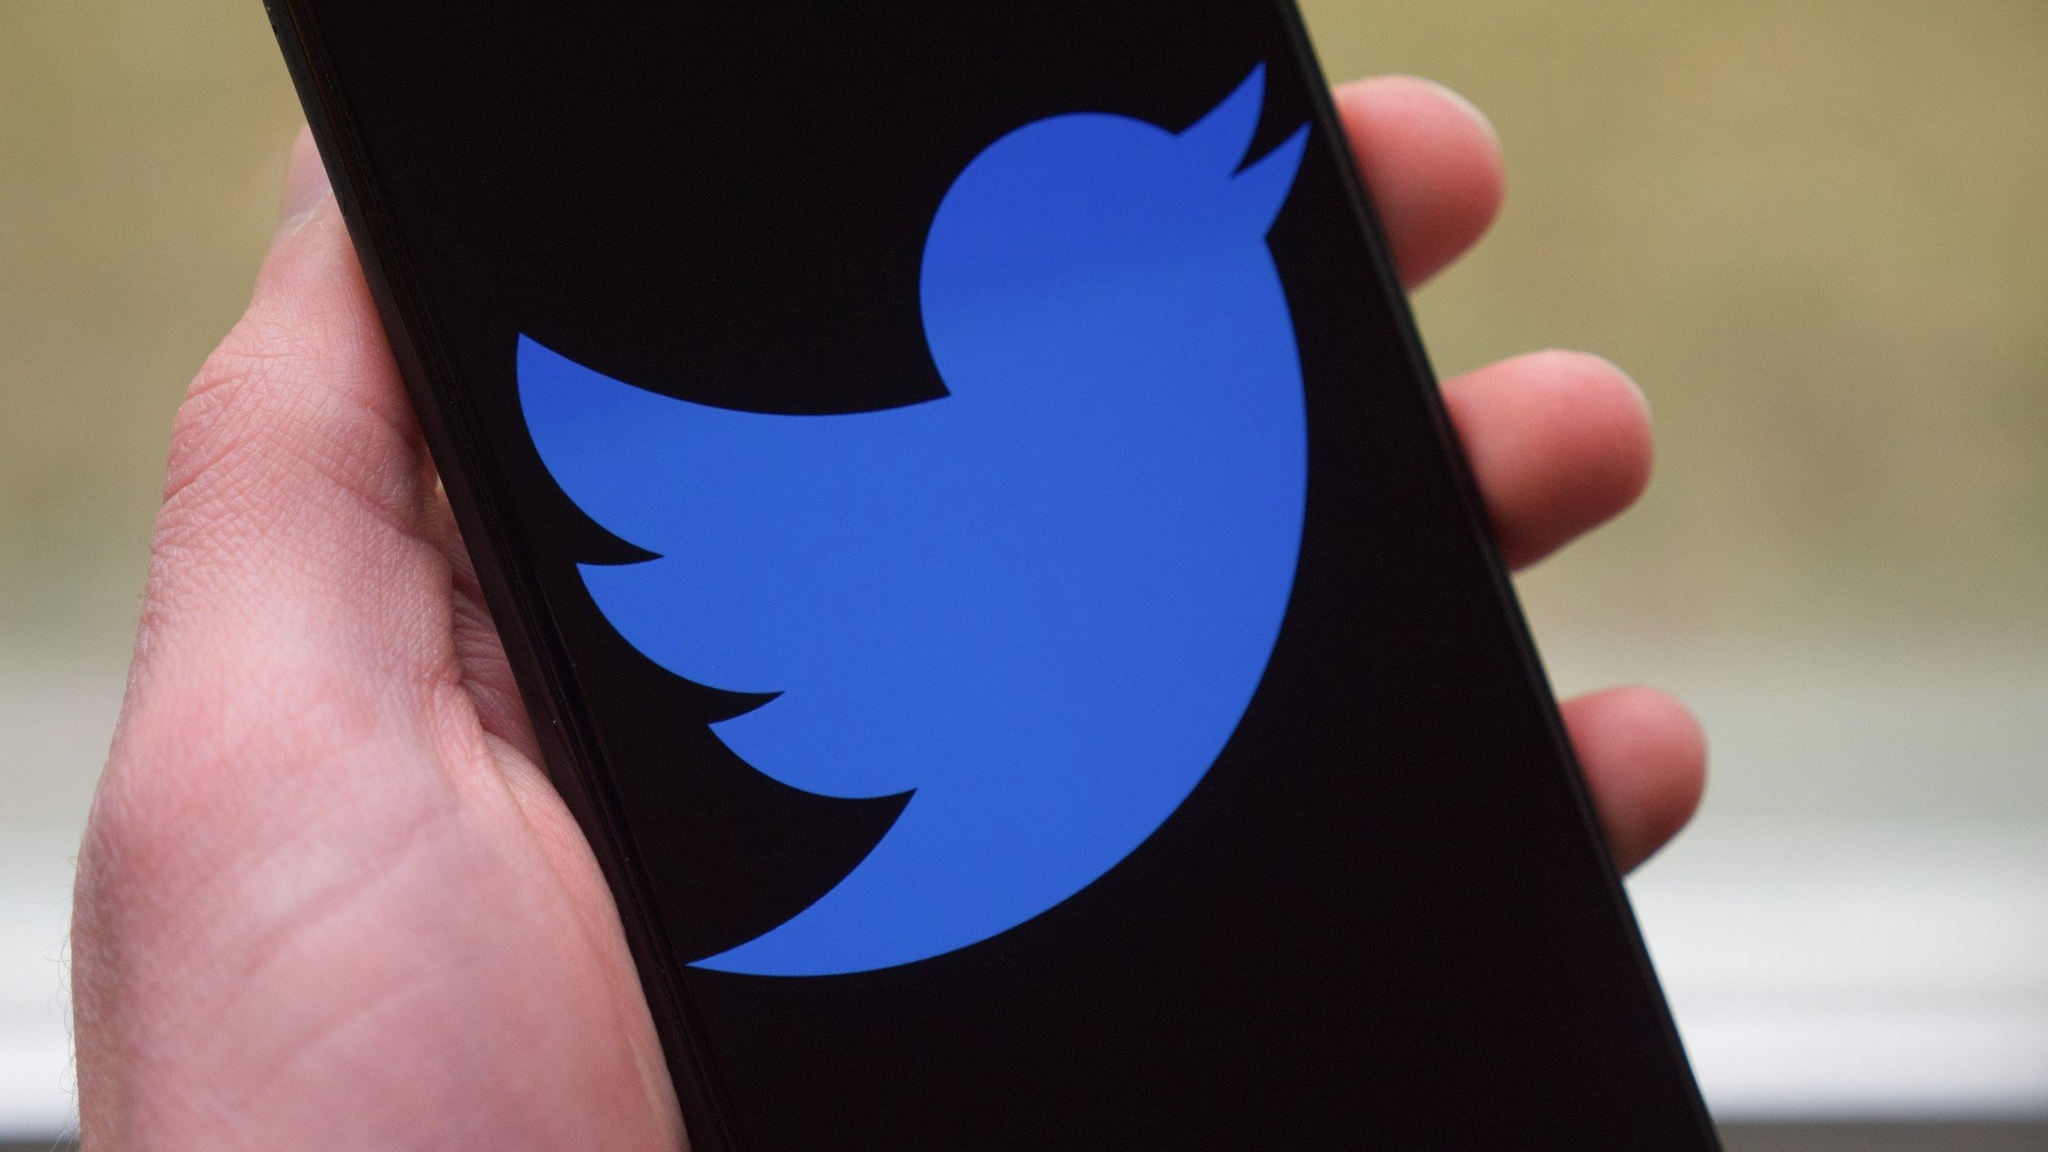 Twitter is on the fritz again as users face login issues